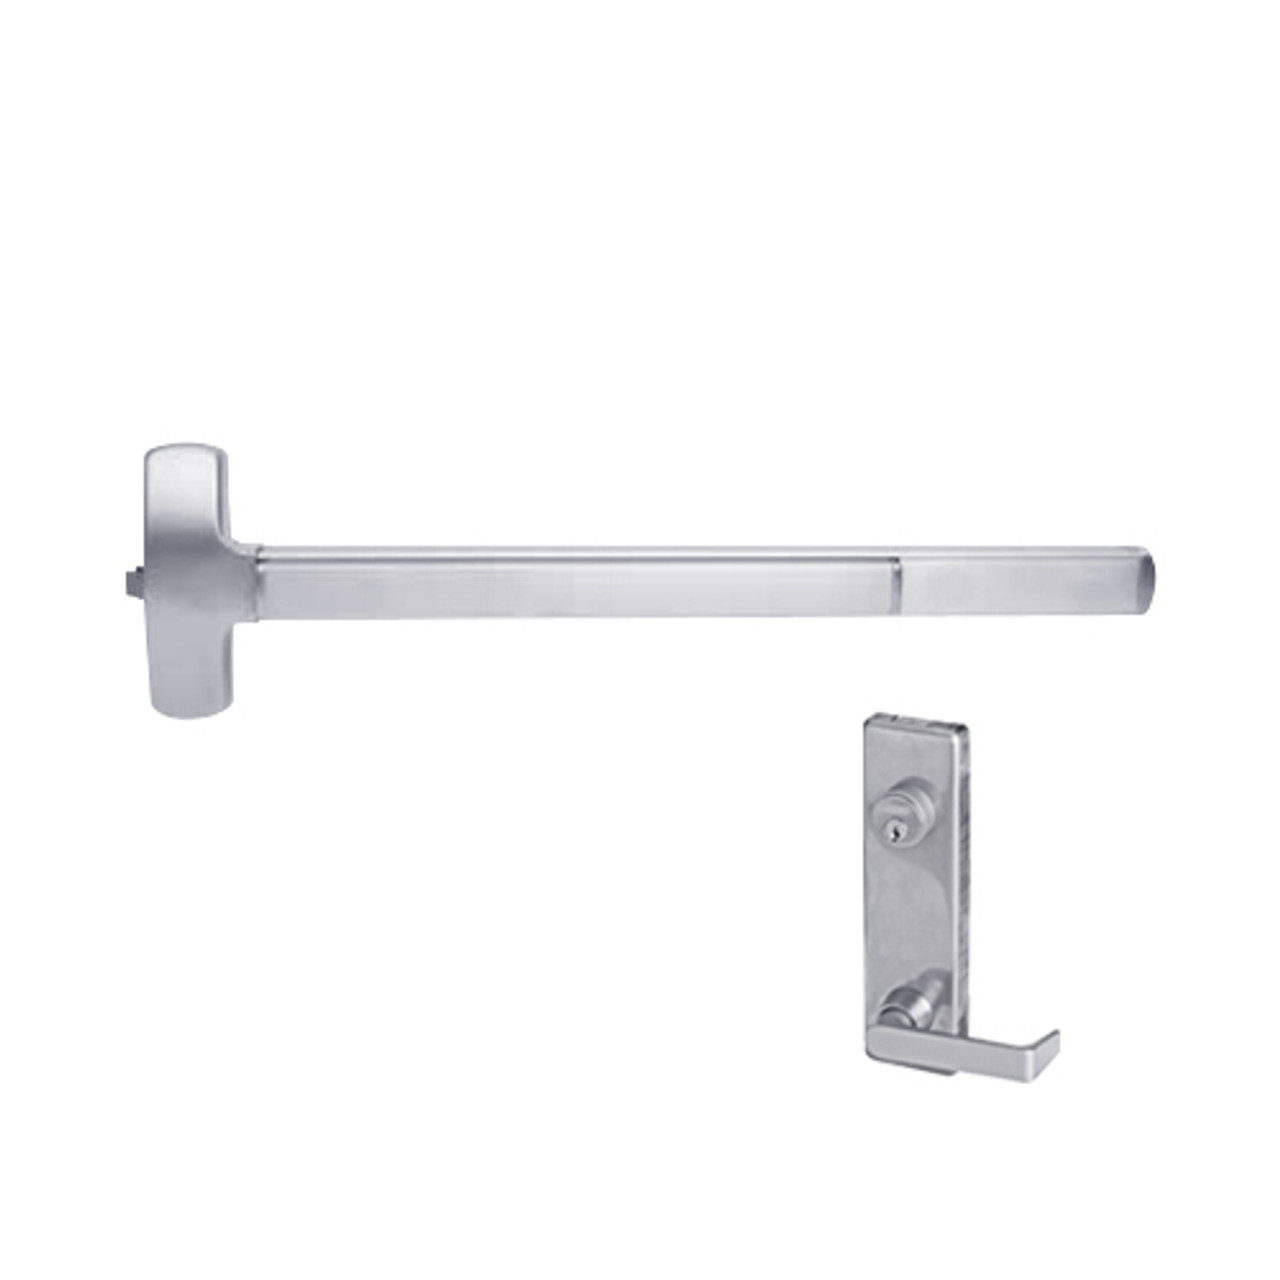 F-25-R-L-DANE-US26-4-LHR Falcon Exit Device in Polished Chrome